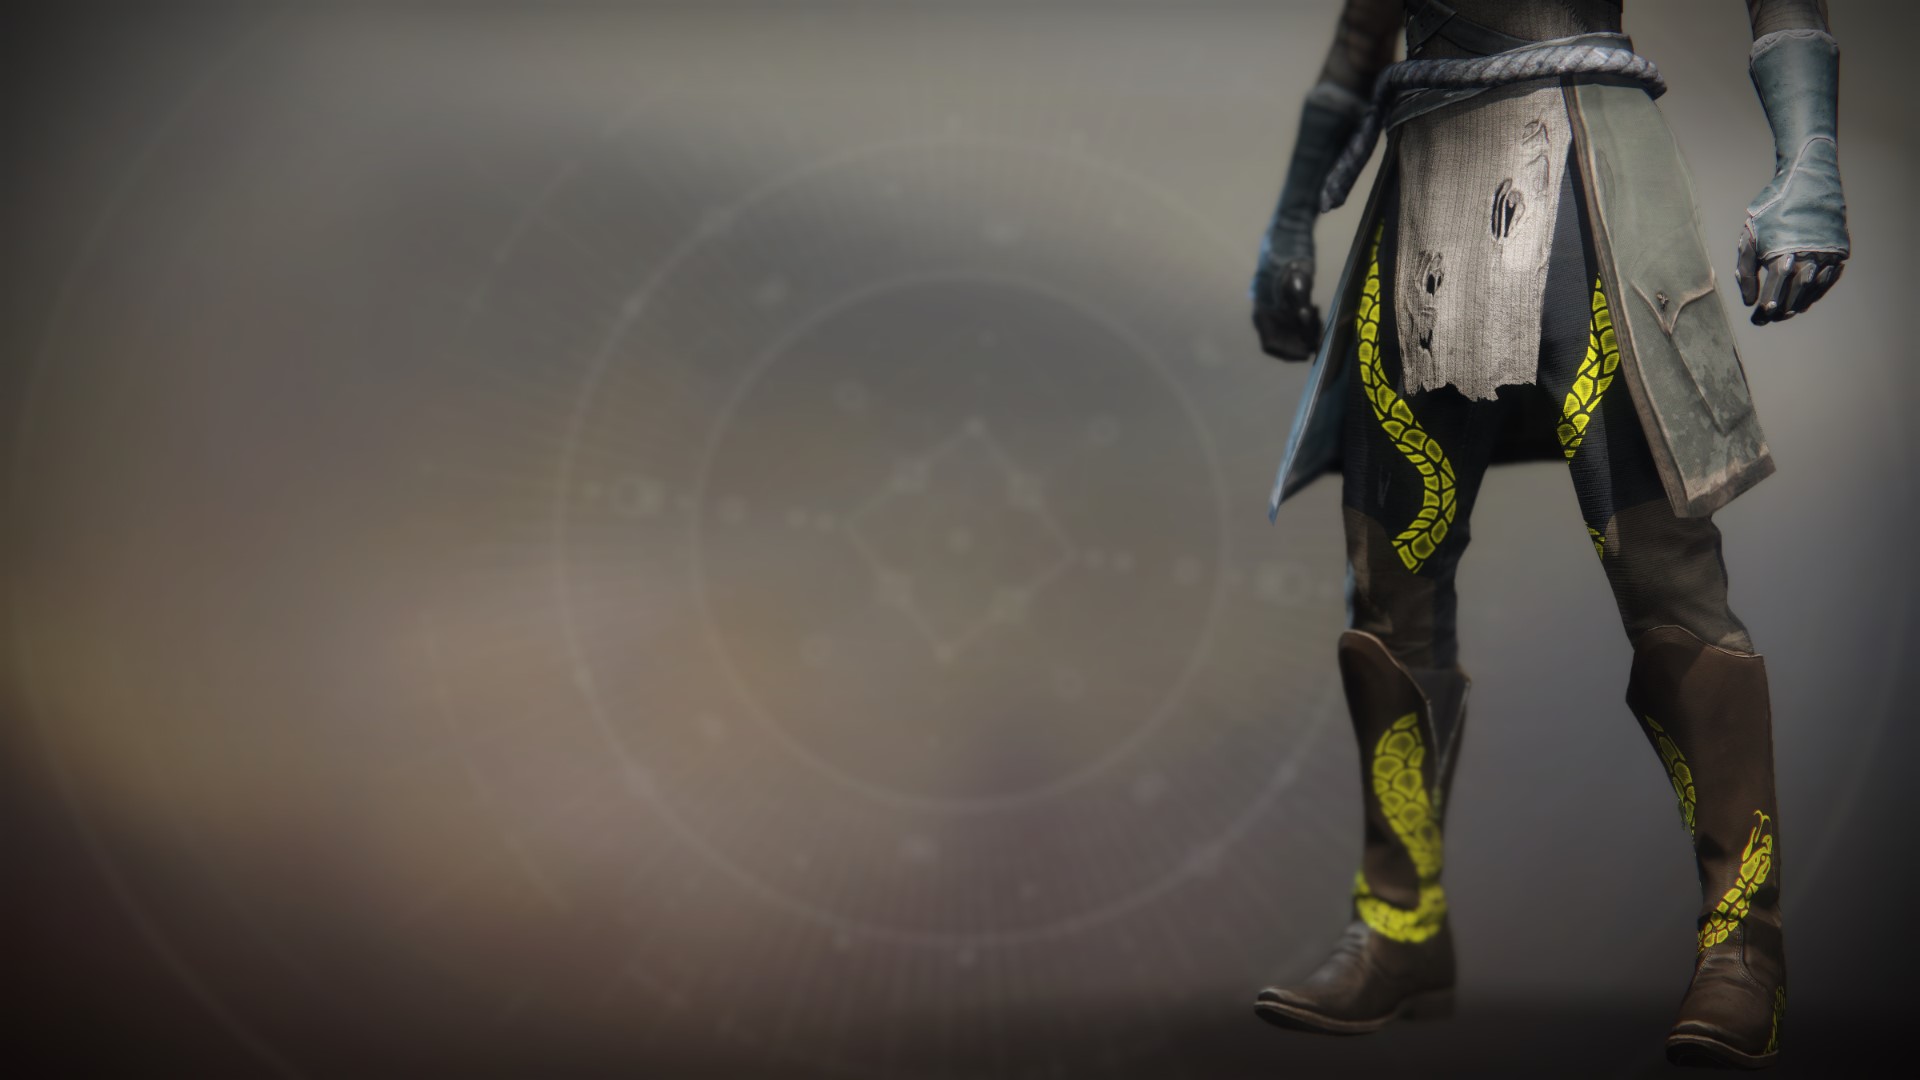 An in-game render of the Illicit Sentry Boots.